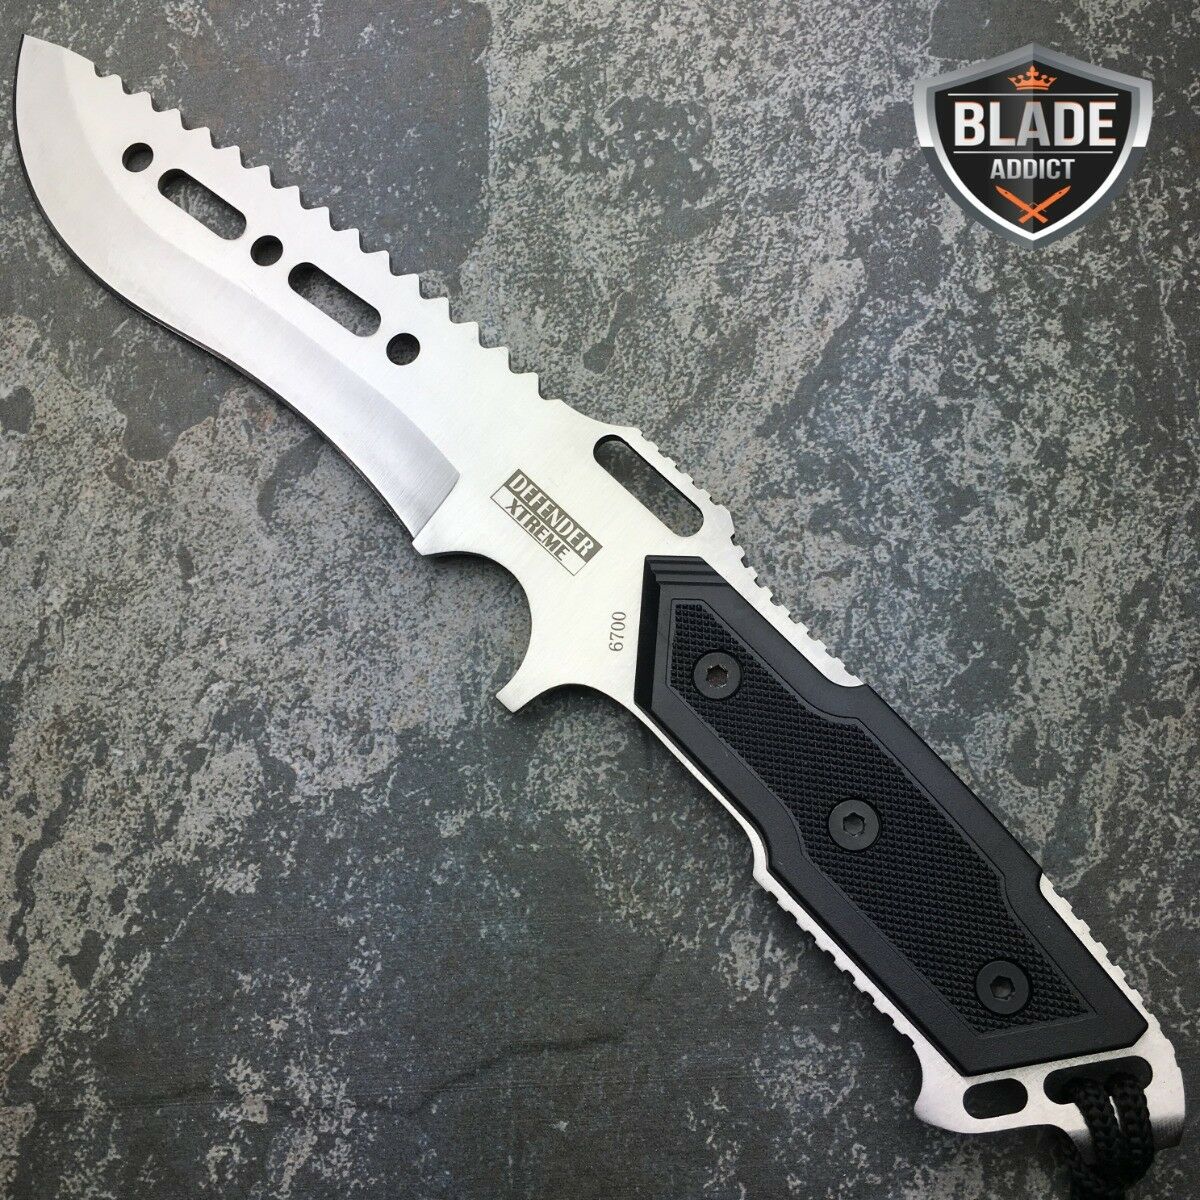 12" SILVER Fixed Blade Tactical Combat Hunting Survival Knife w/ Sheath Bowie Outdoor